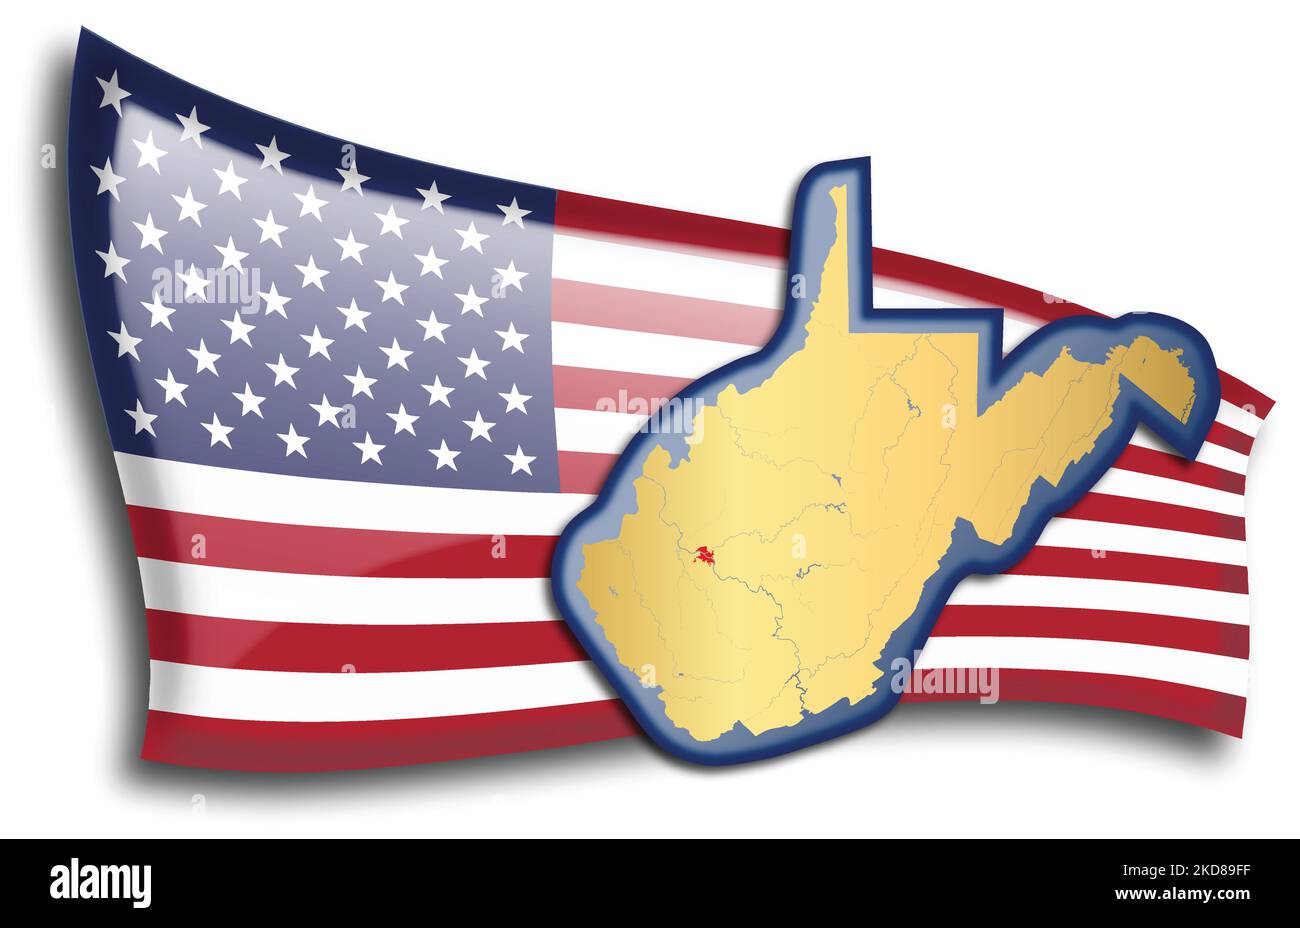 U.S. states - map of West Virginia against an American flag. Rivers and lakes are shown on the map. American Flag and State Map can be used separately Stock Vector